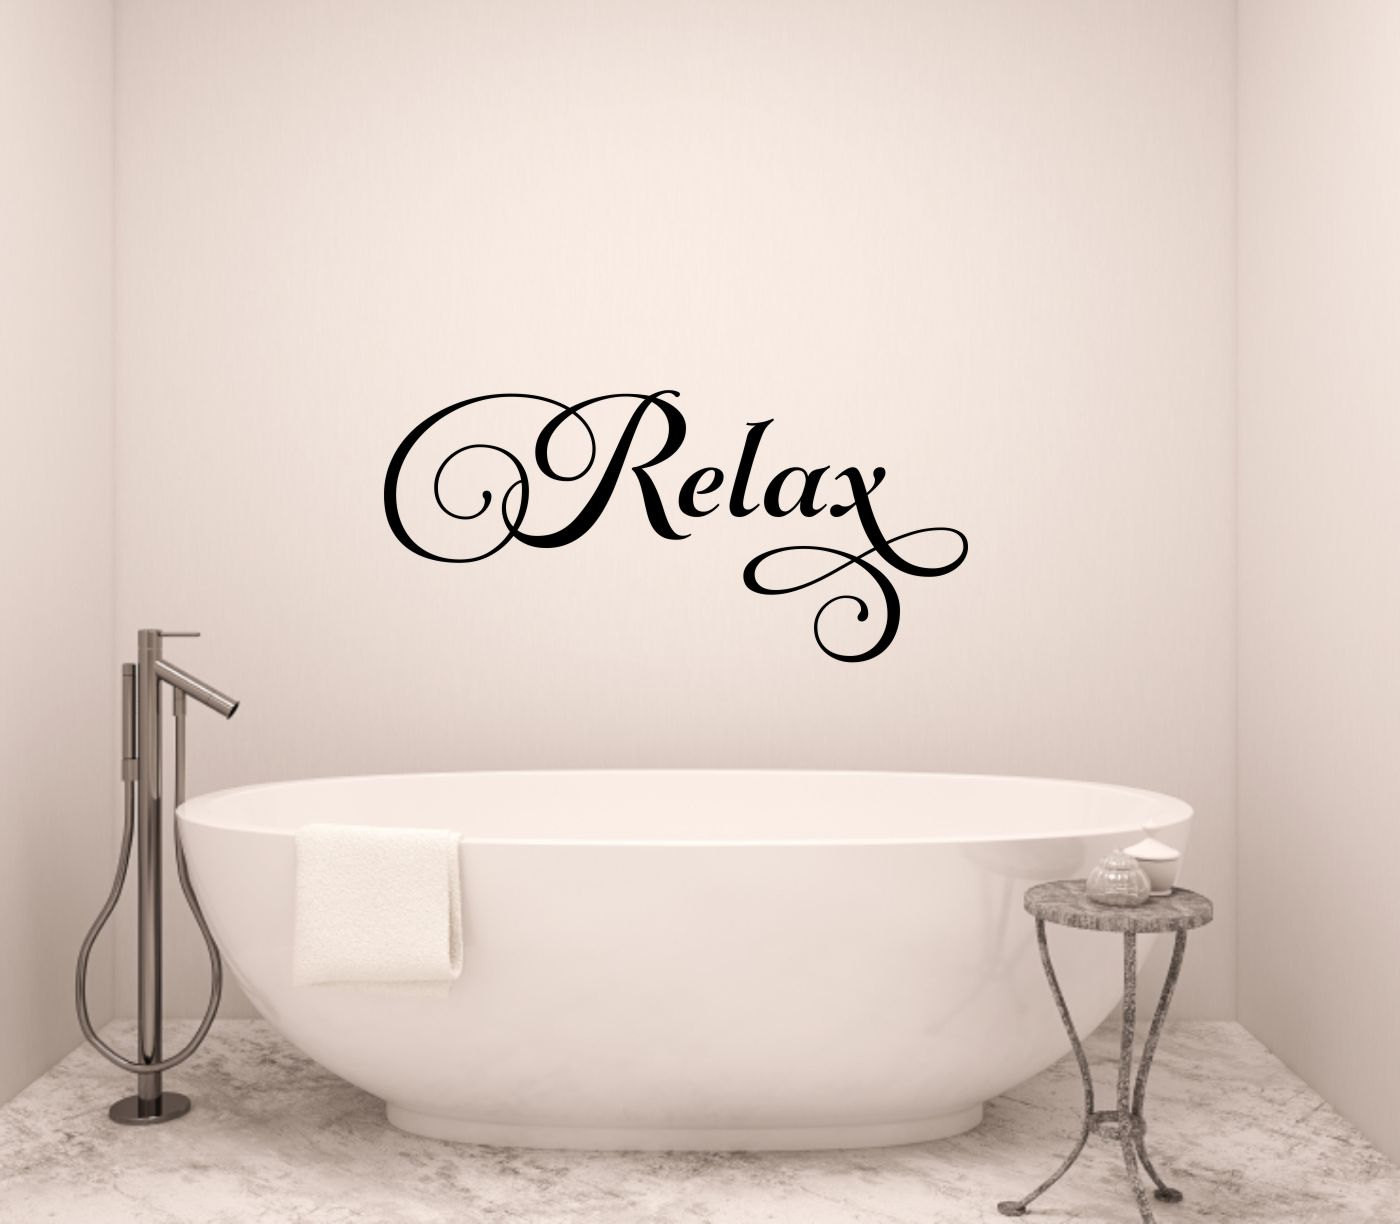 Bathroom Wall Decor Stickers
 Relax Wall Decal Bathroom Wall Decal Bathroom Vinyl Decal